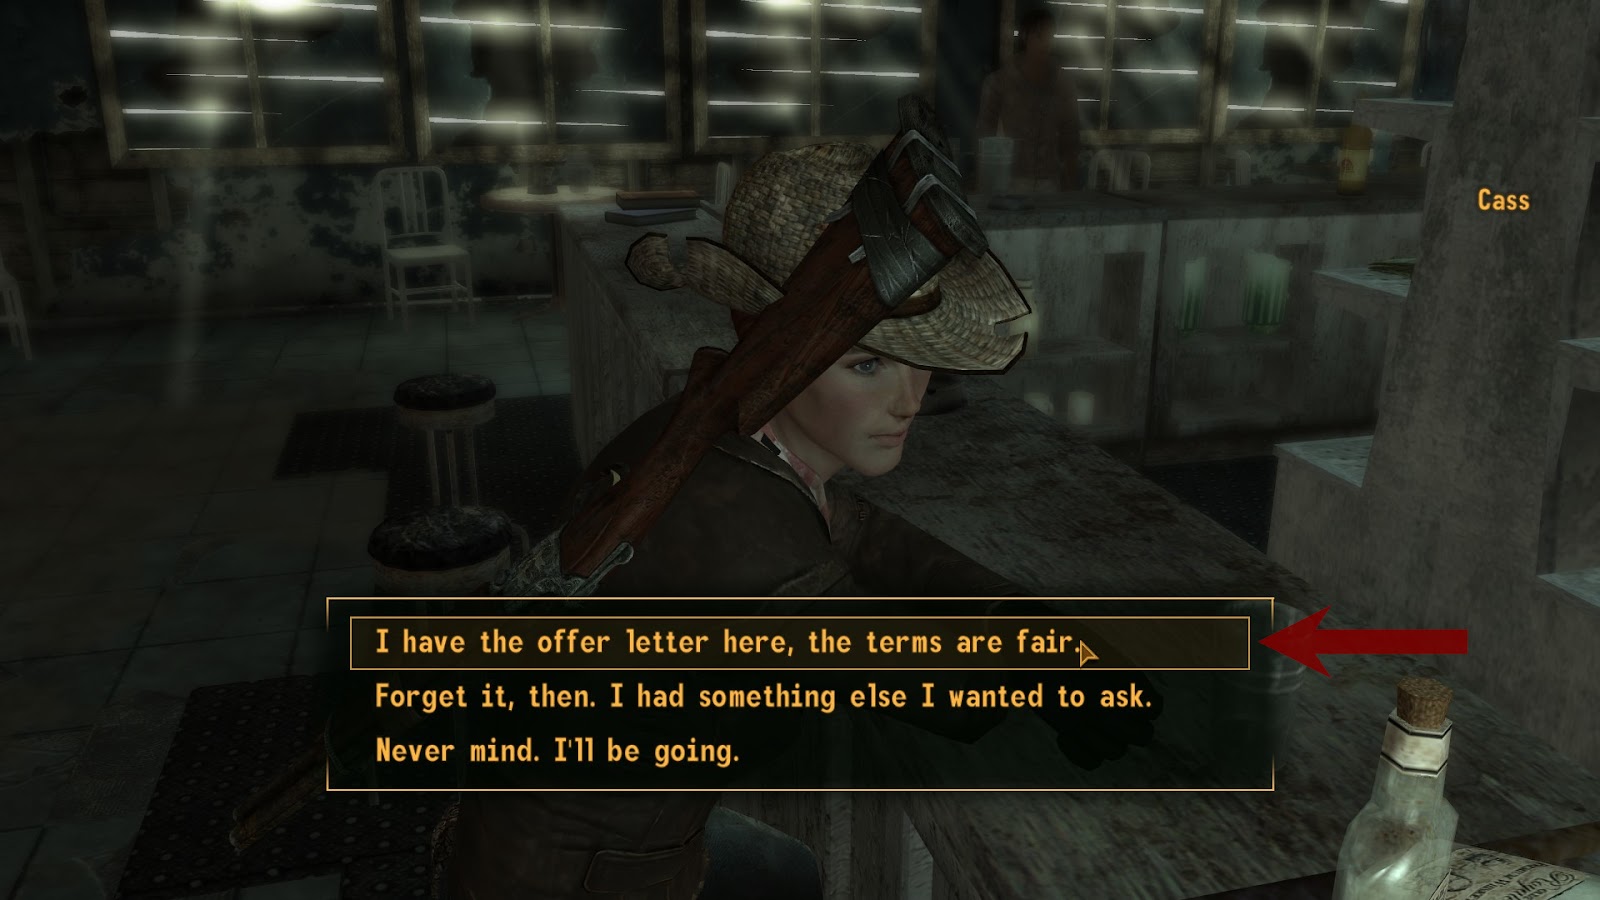 I have the offer letter here, the terms are fair | Fallout: New Vegas